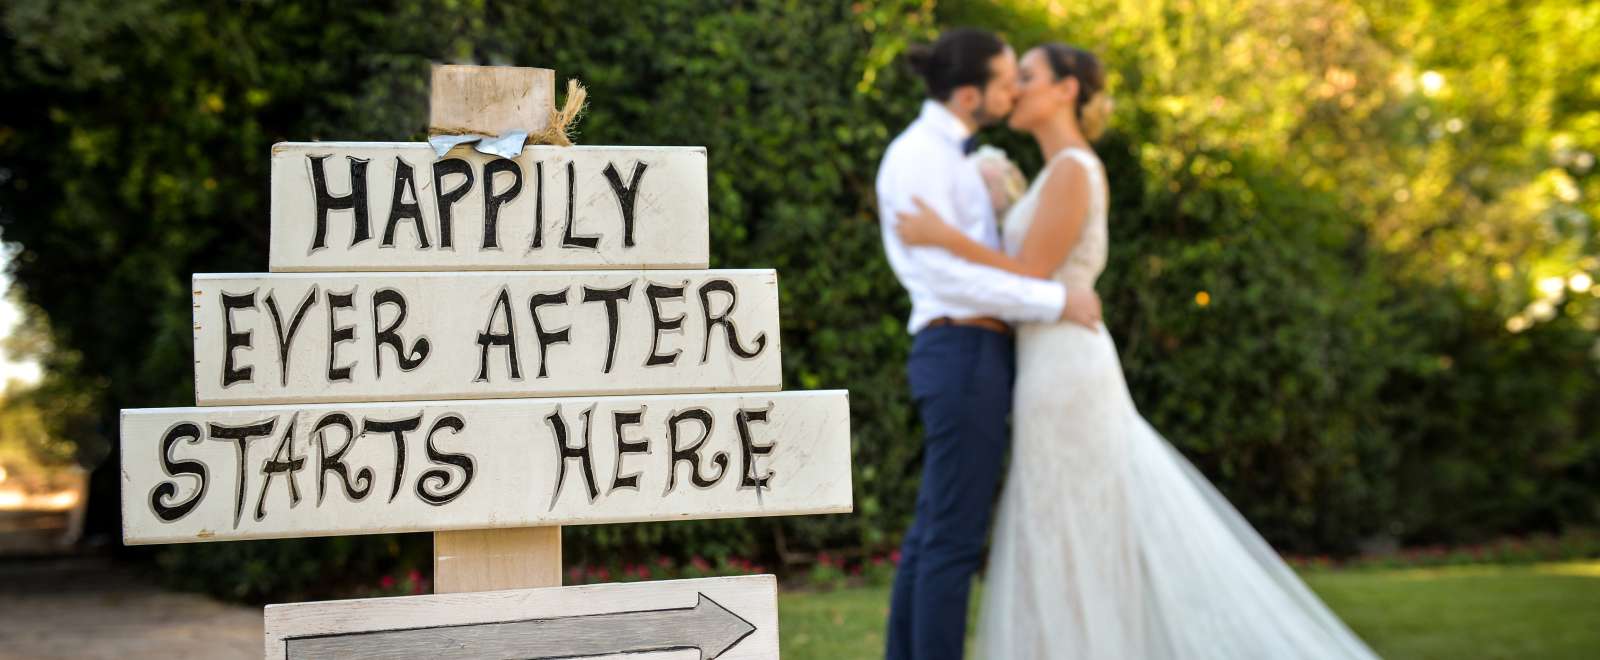 Bride and groom kissing outdoors next to wedding sign